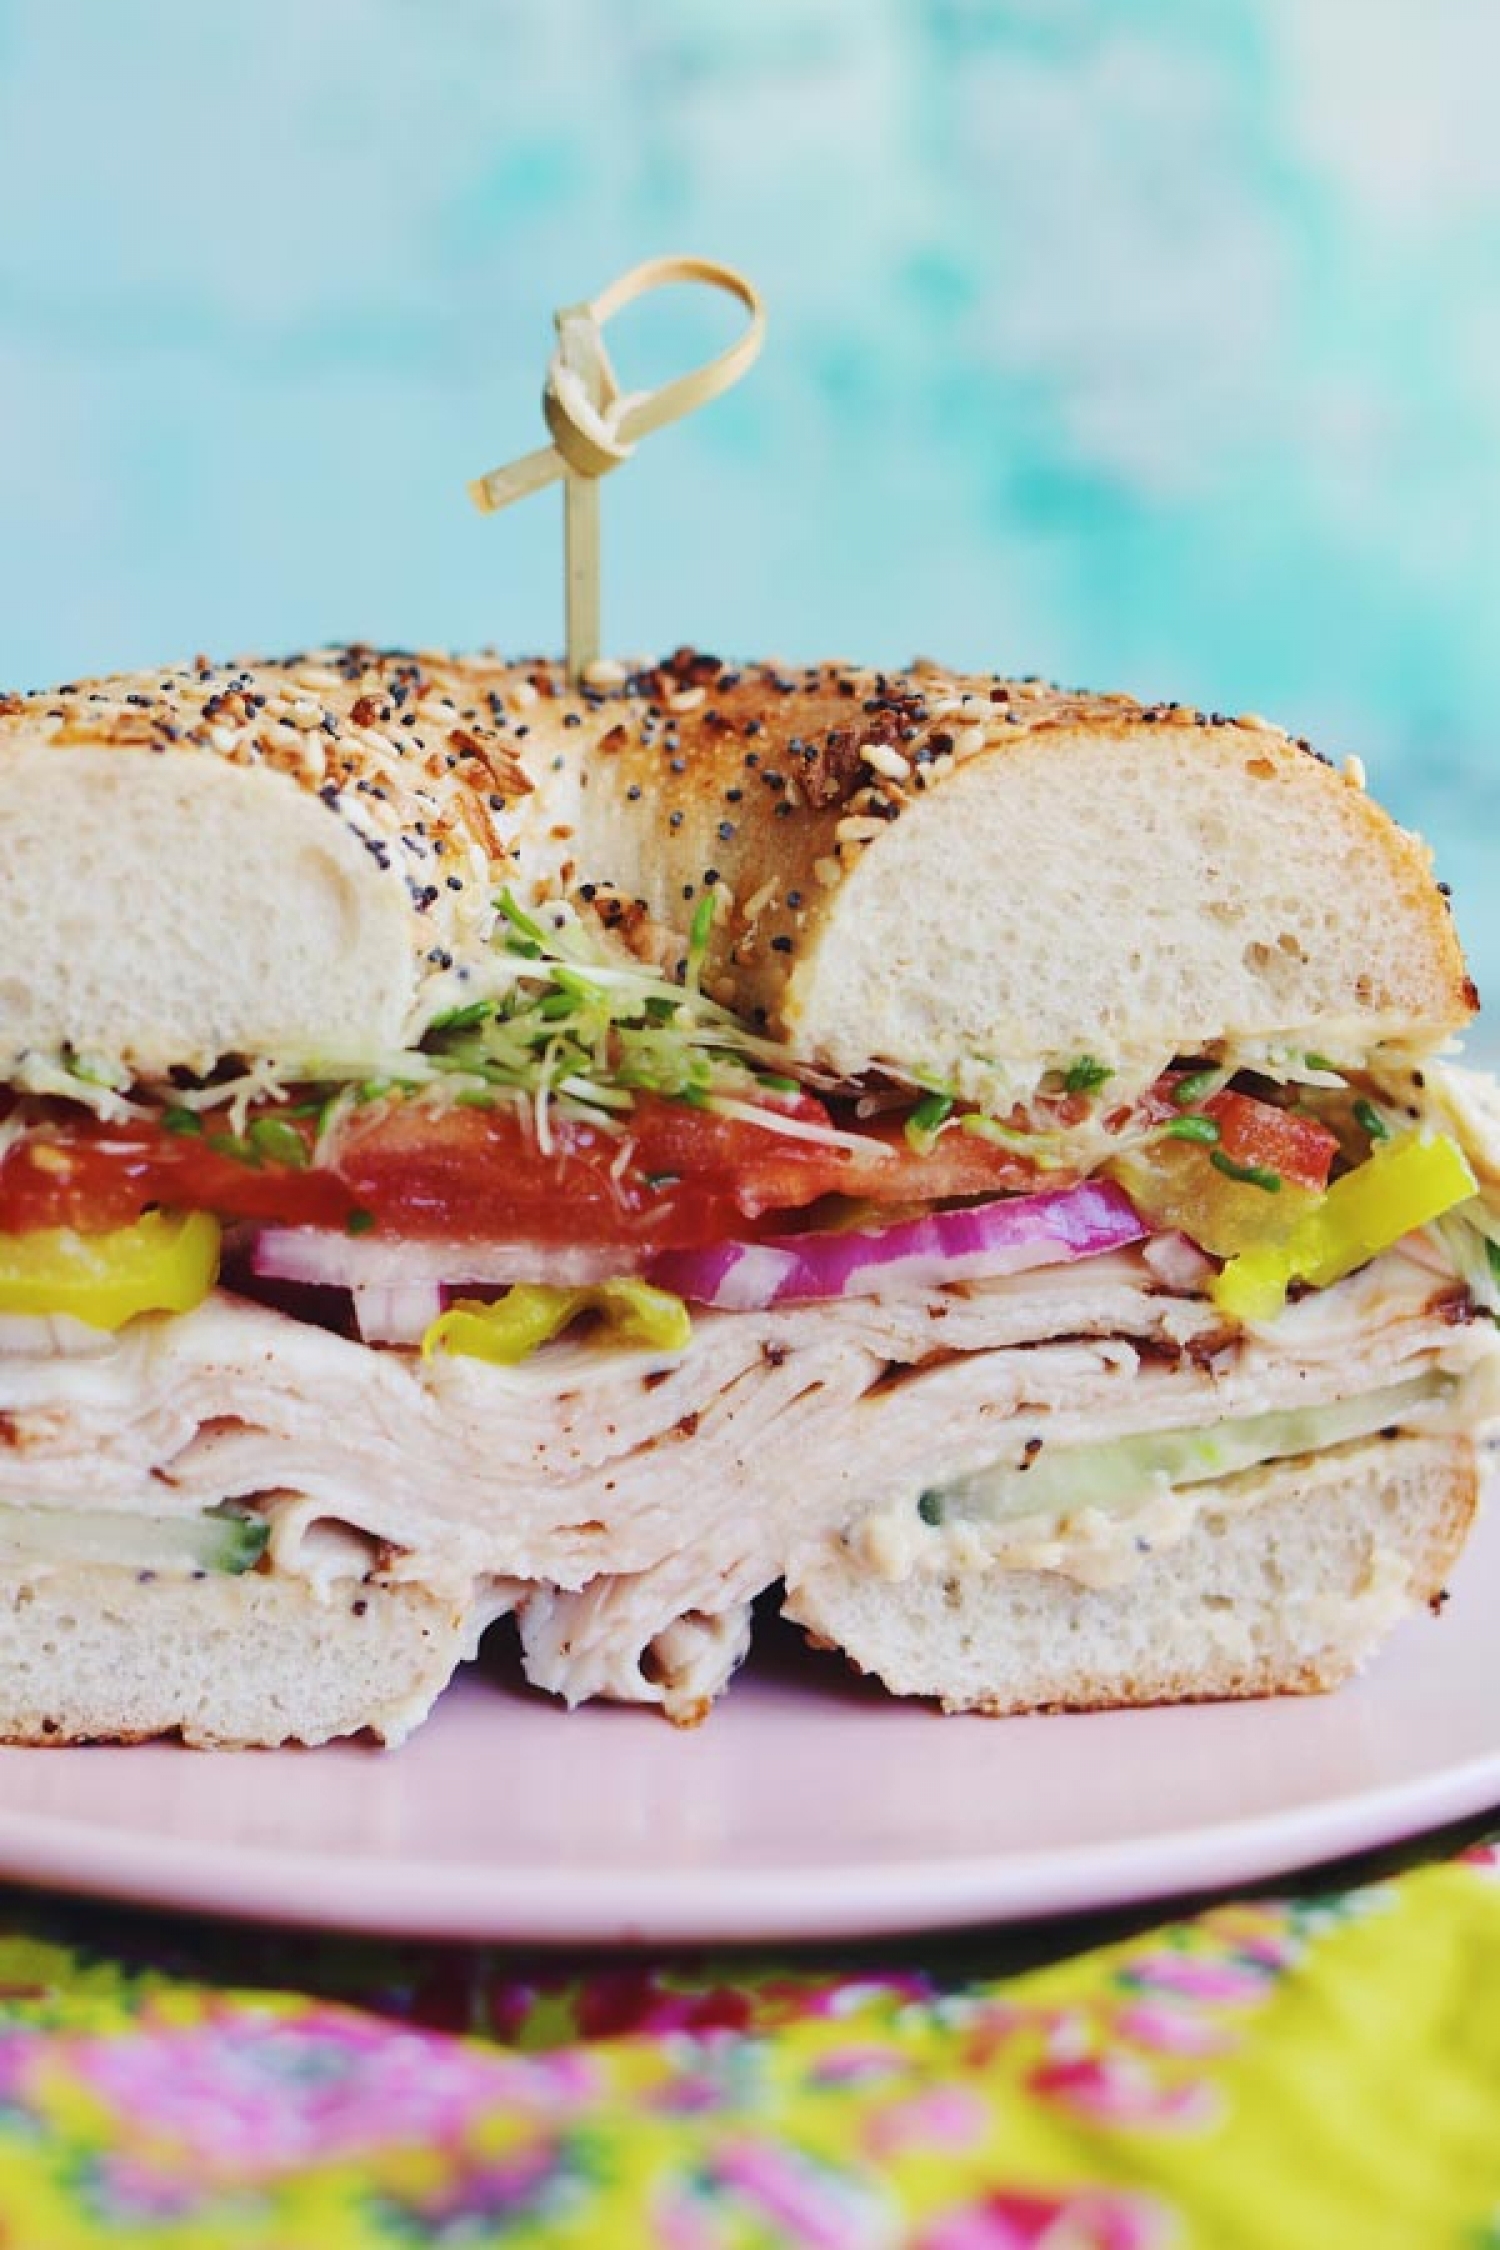 Satisfying Bagel Sandwiches for Weekday Lunches